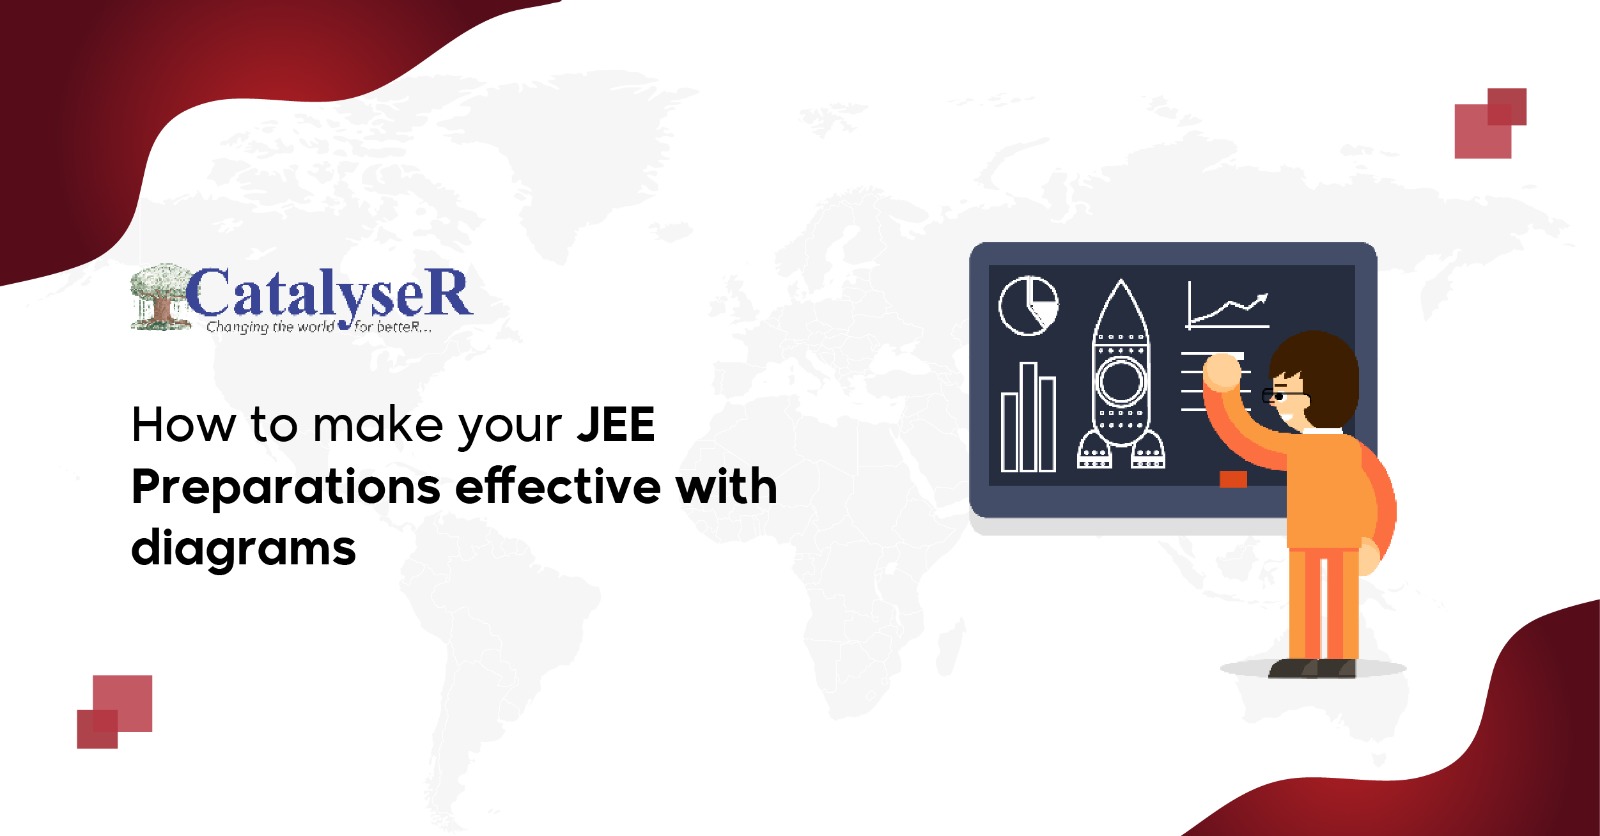 How to make your JEE Preparations effective with diagrams